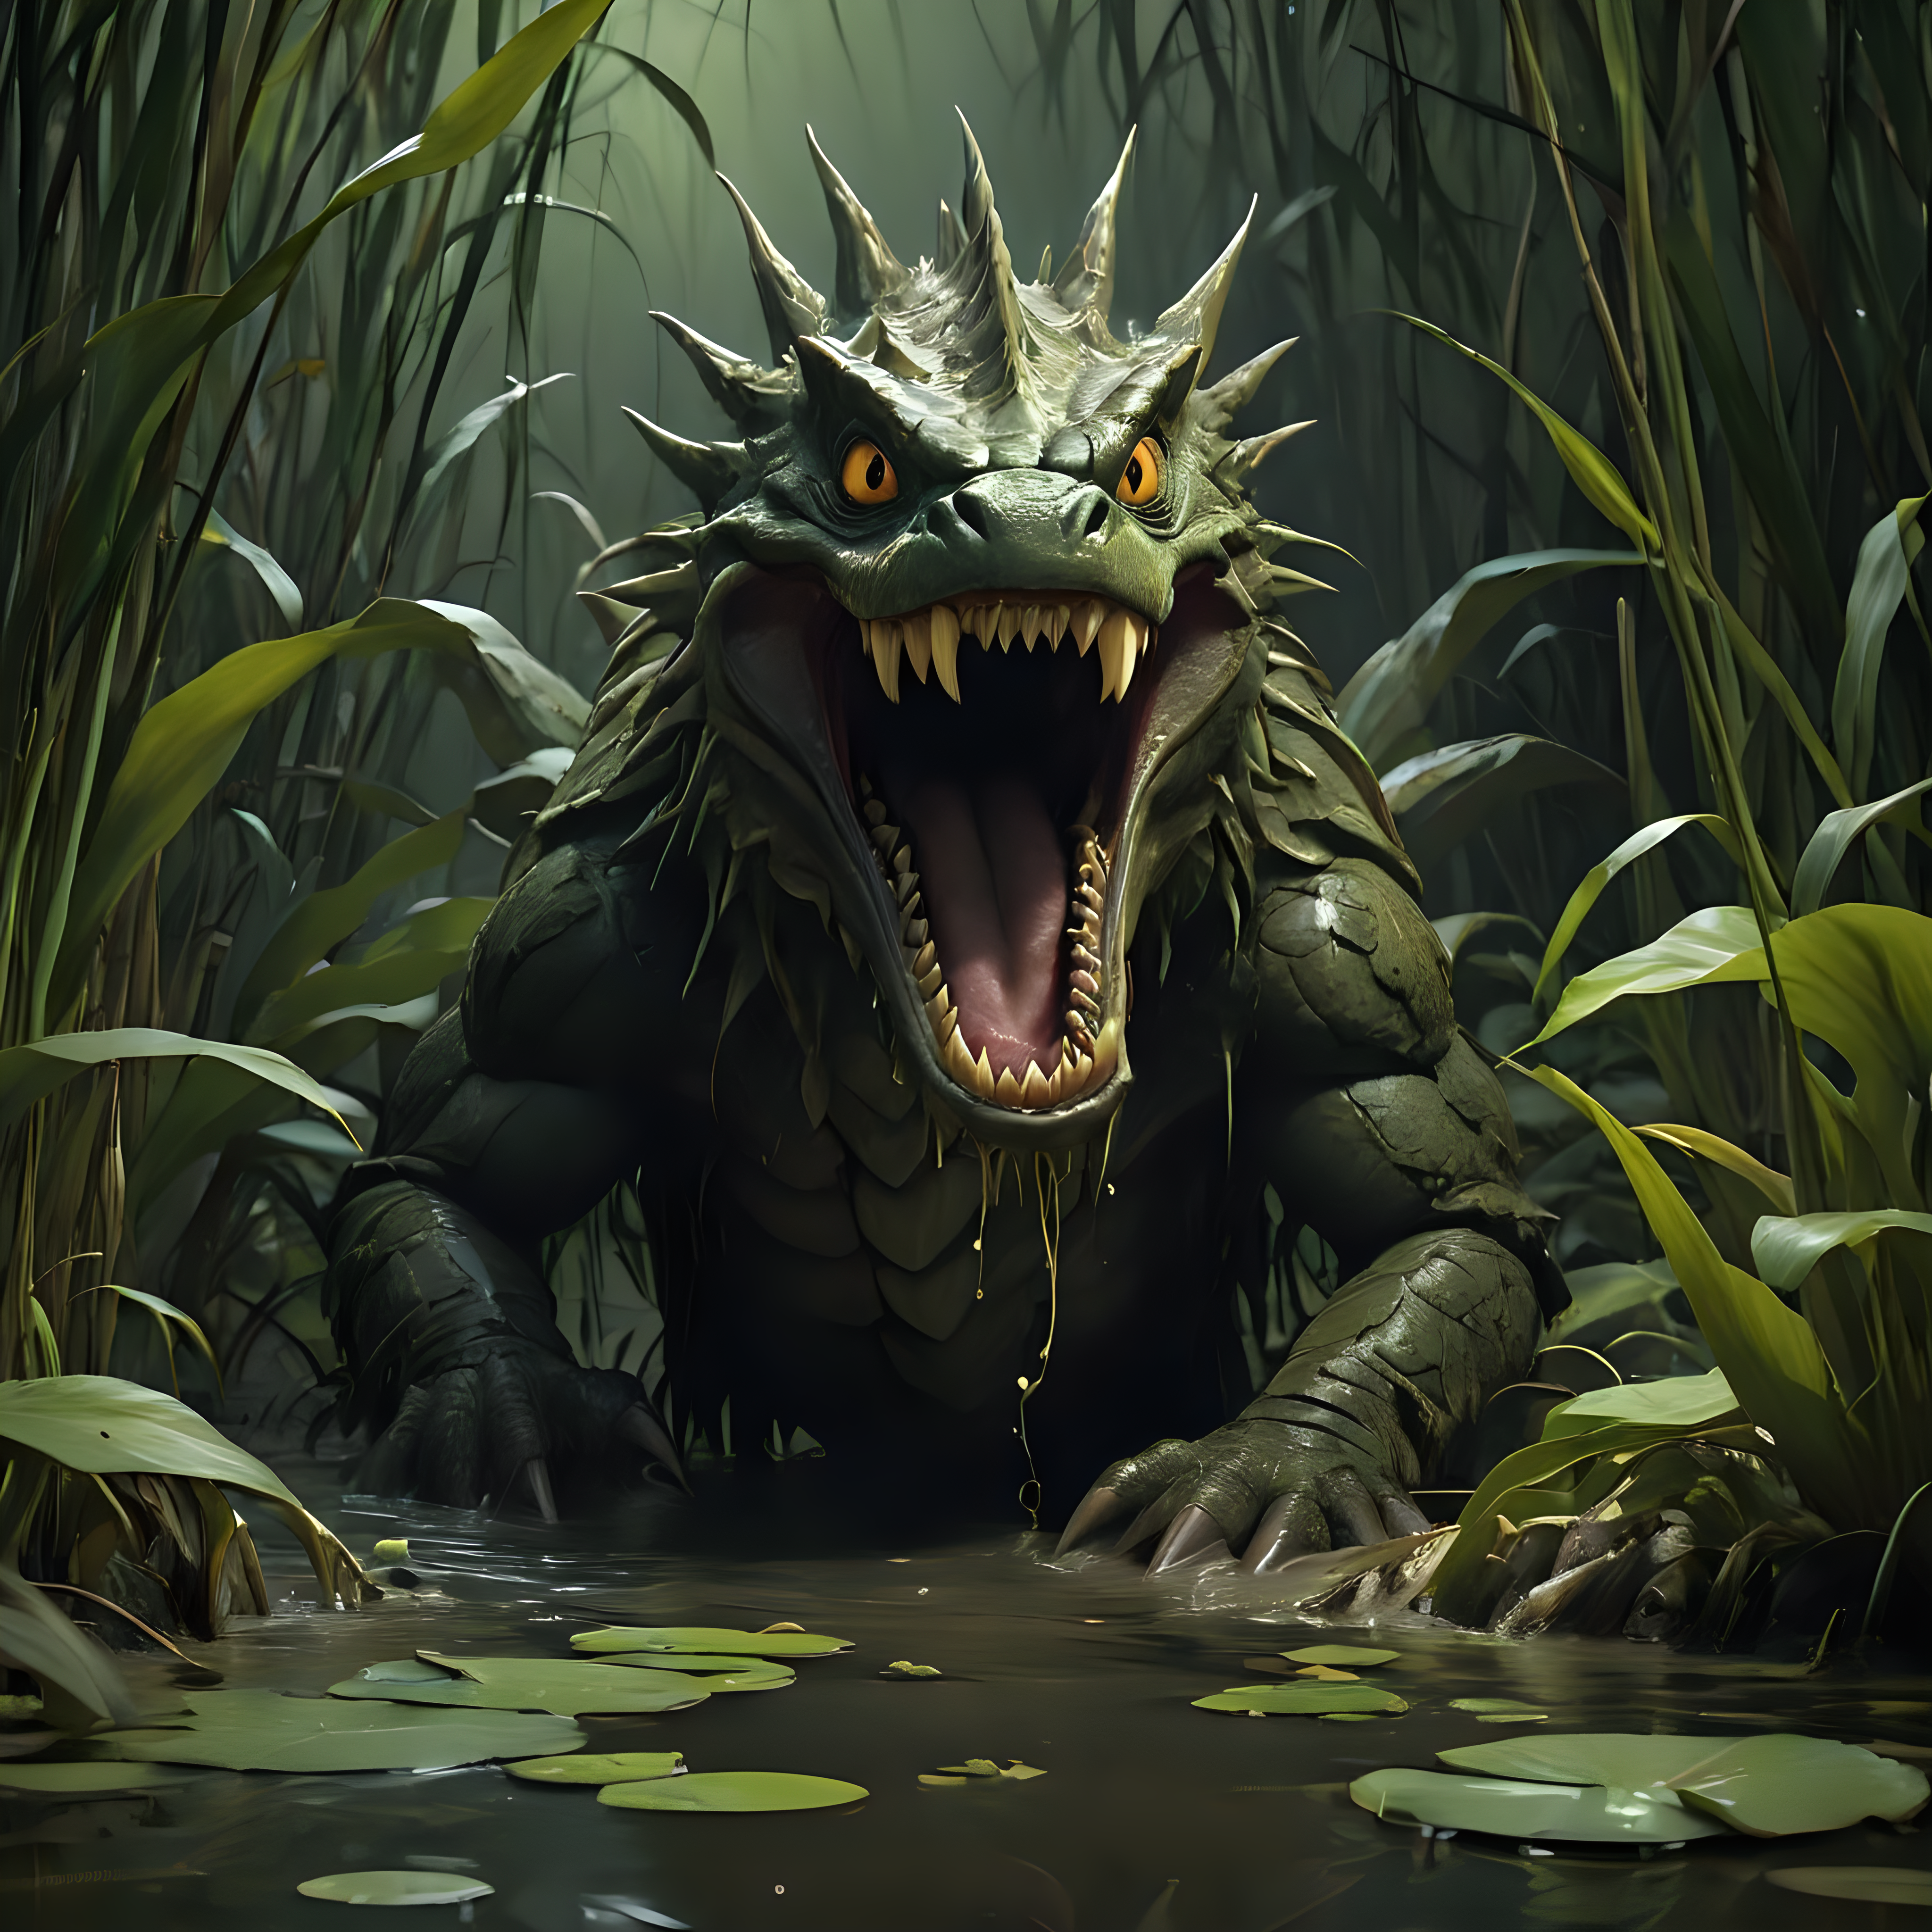 Sinister Scaled Mirebeast Gliding Through Murky Swamp Waters